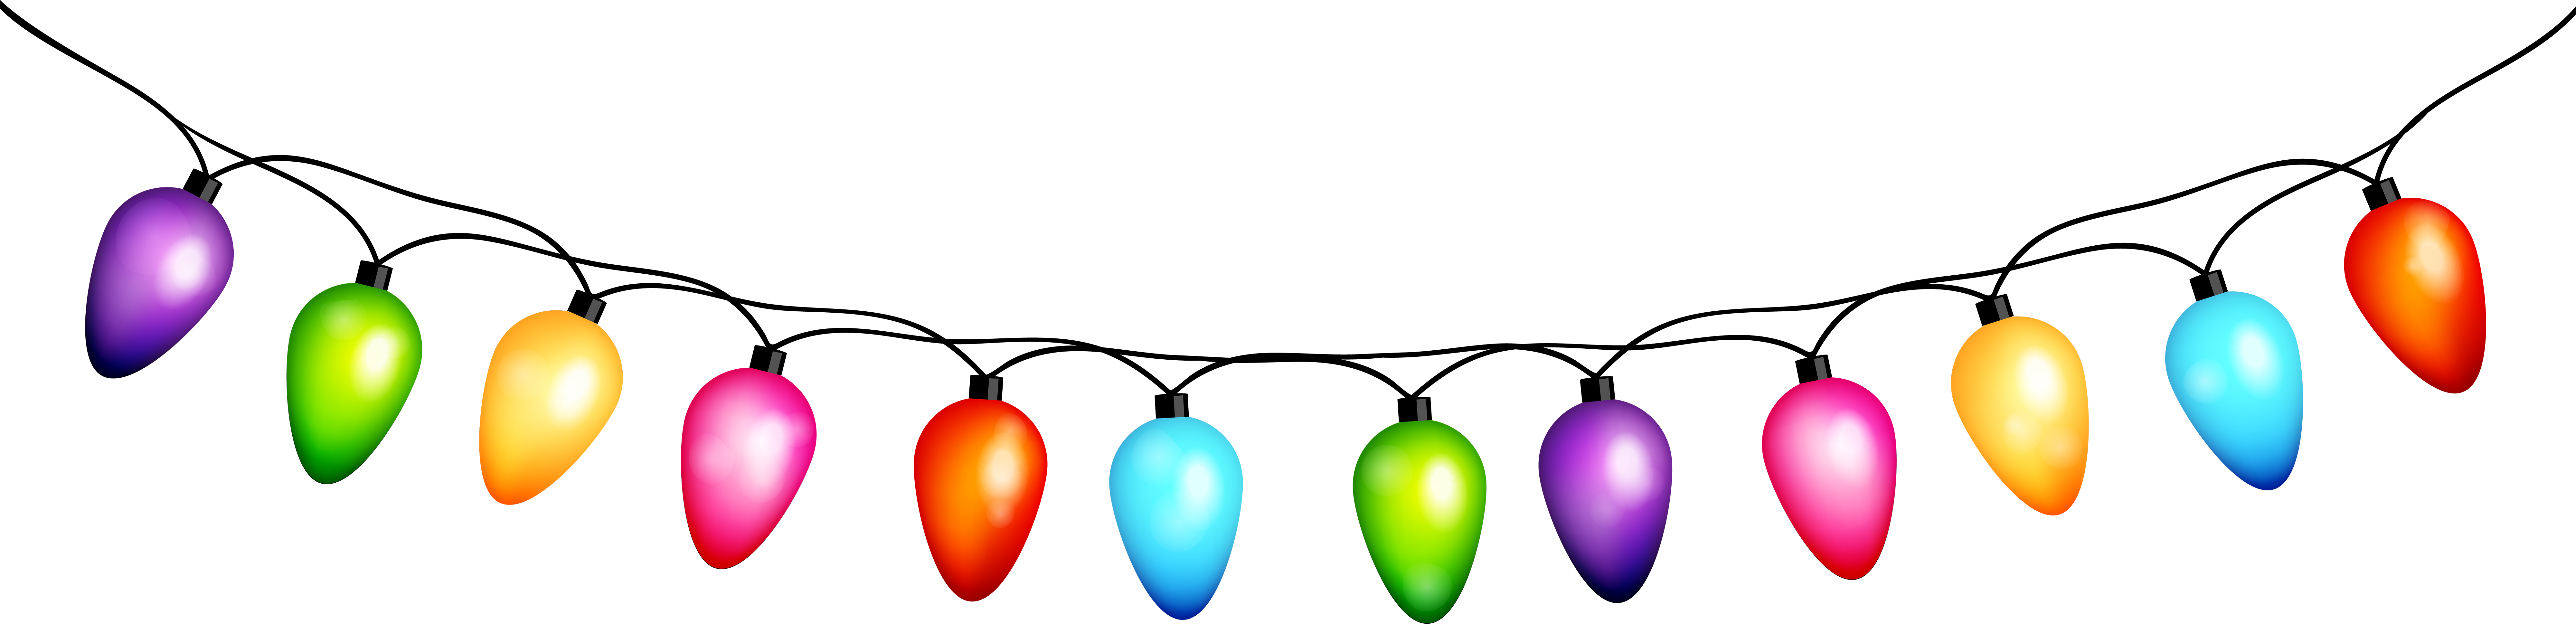 Colorful Christmas Lights Clipart